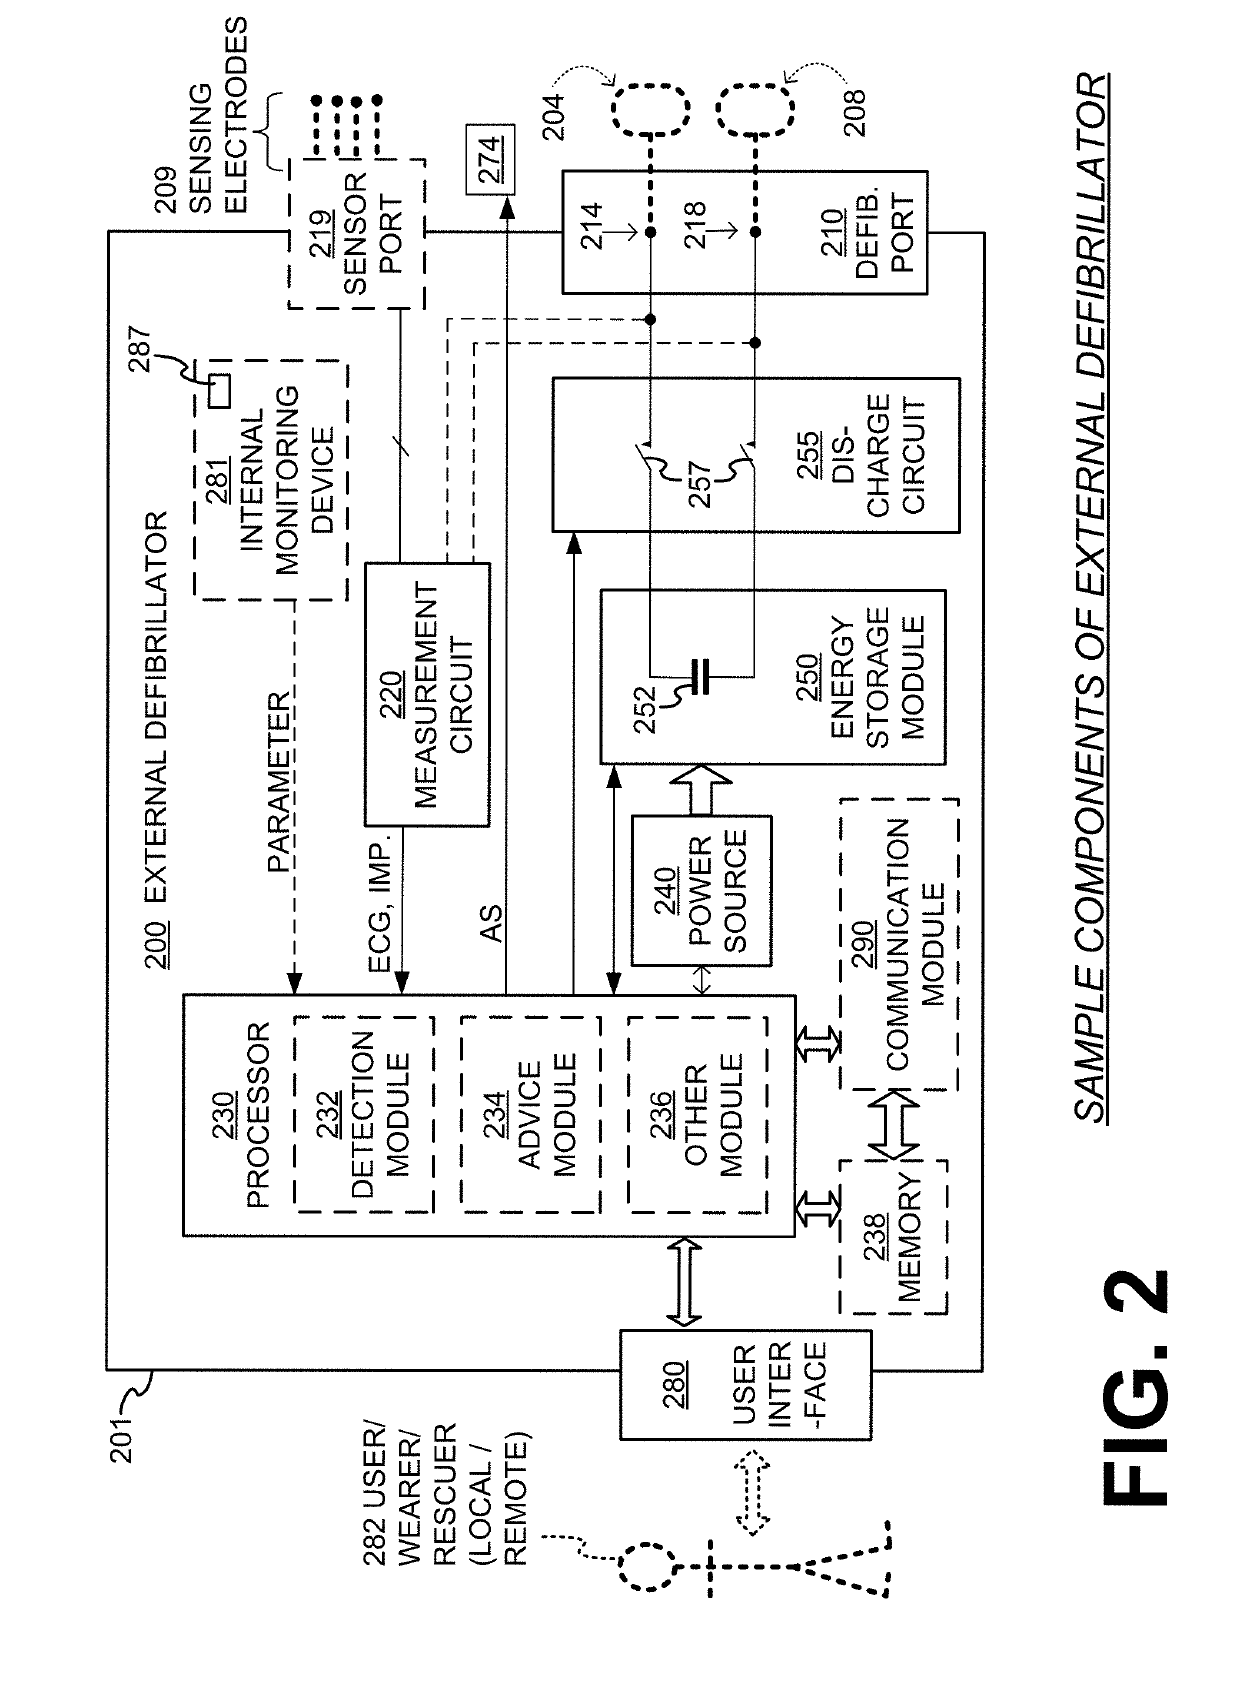 Wearable cardioverter defibrillator (WCD) system logging events and broadcasting state changes and system status information to external clients